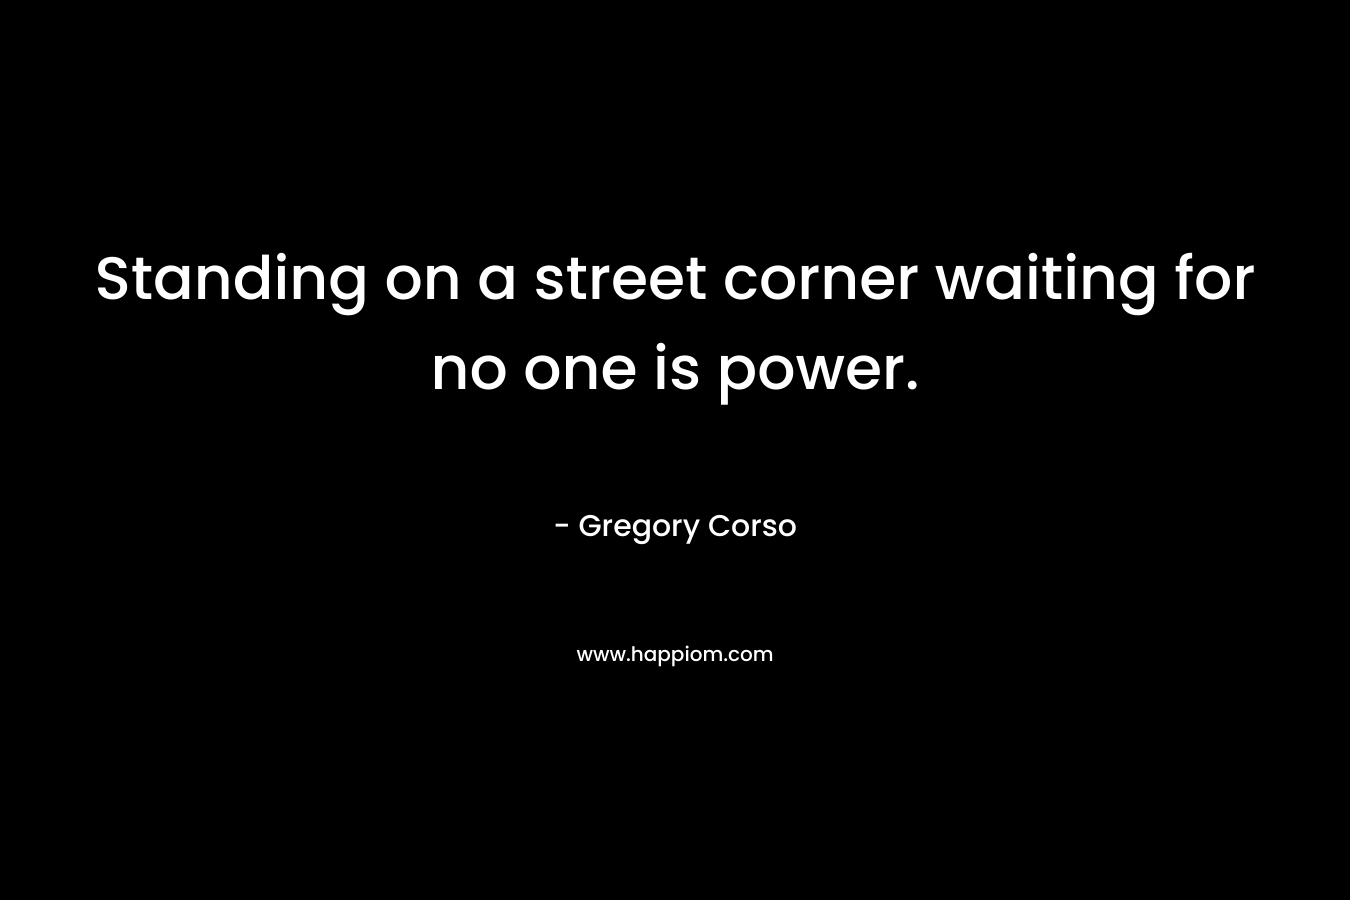 Standing on a street corner waiting for no one is power.